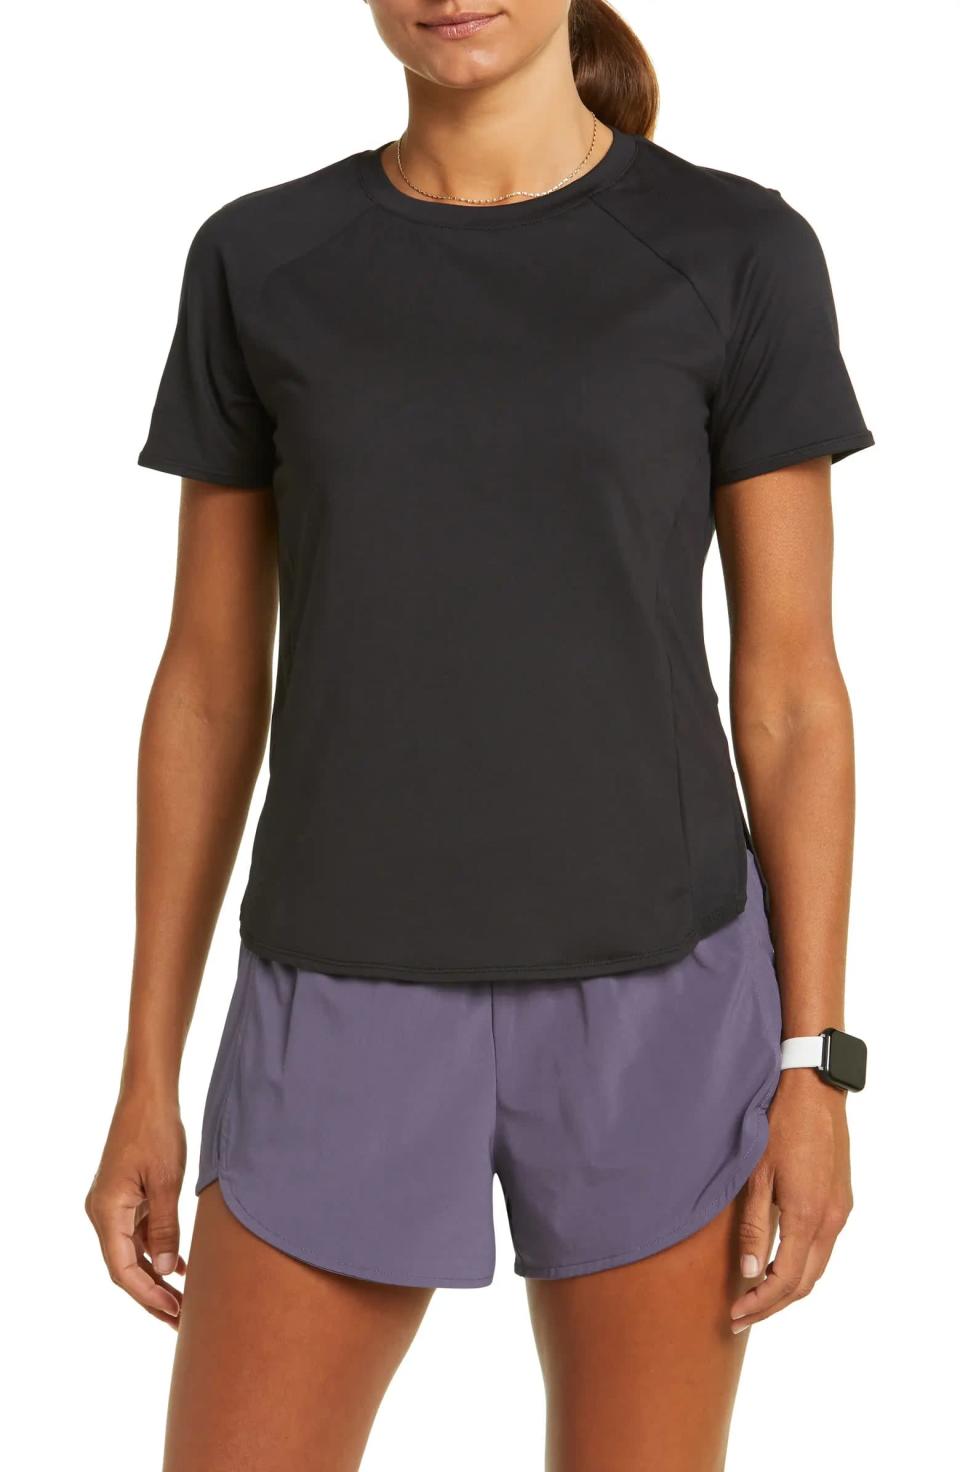 <p>You can never go wrong with having a classic black tee included in your stock of athletic wear essentials. This <span>Zella Performance Mesh Top</span> ($33, originally $49) is an even more elevated tee option, as it features a mesh back design and side panel accents, both of which help to provide more breathability in even the warmest temperatures.</p>